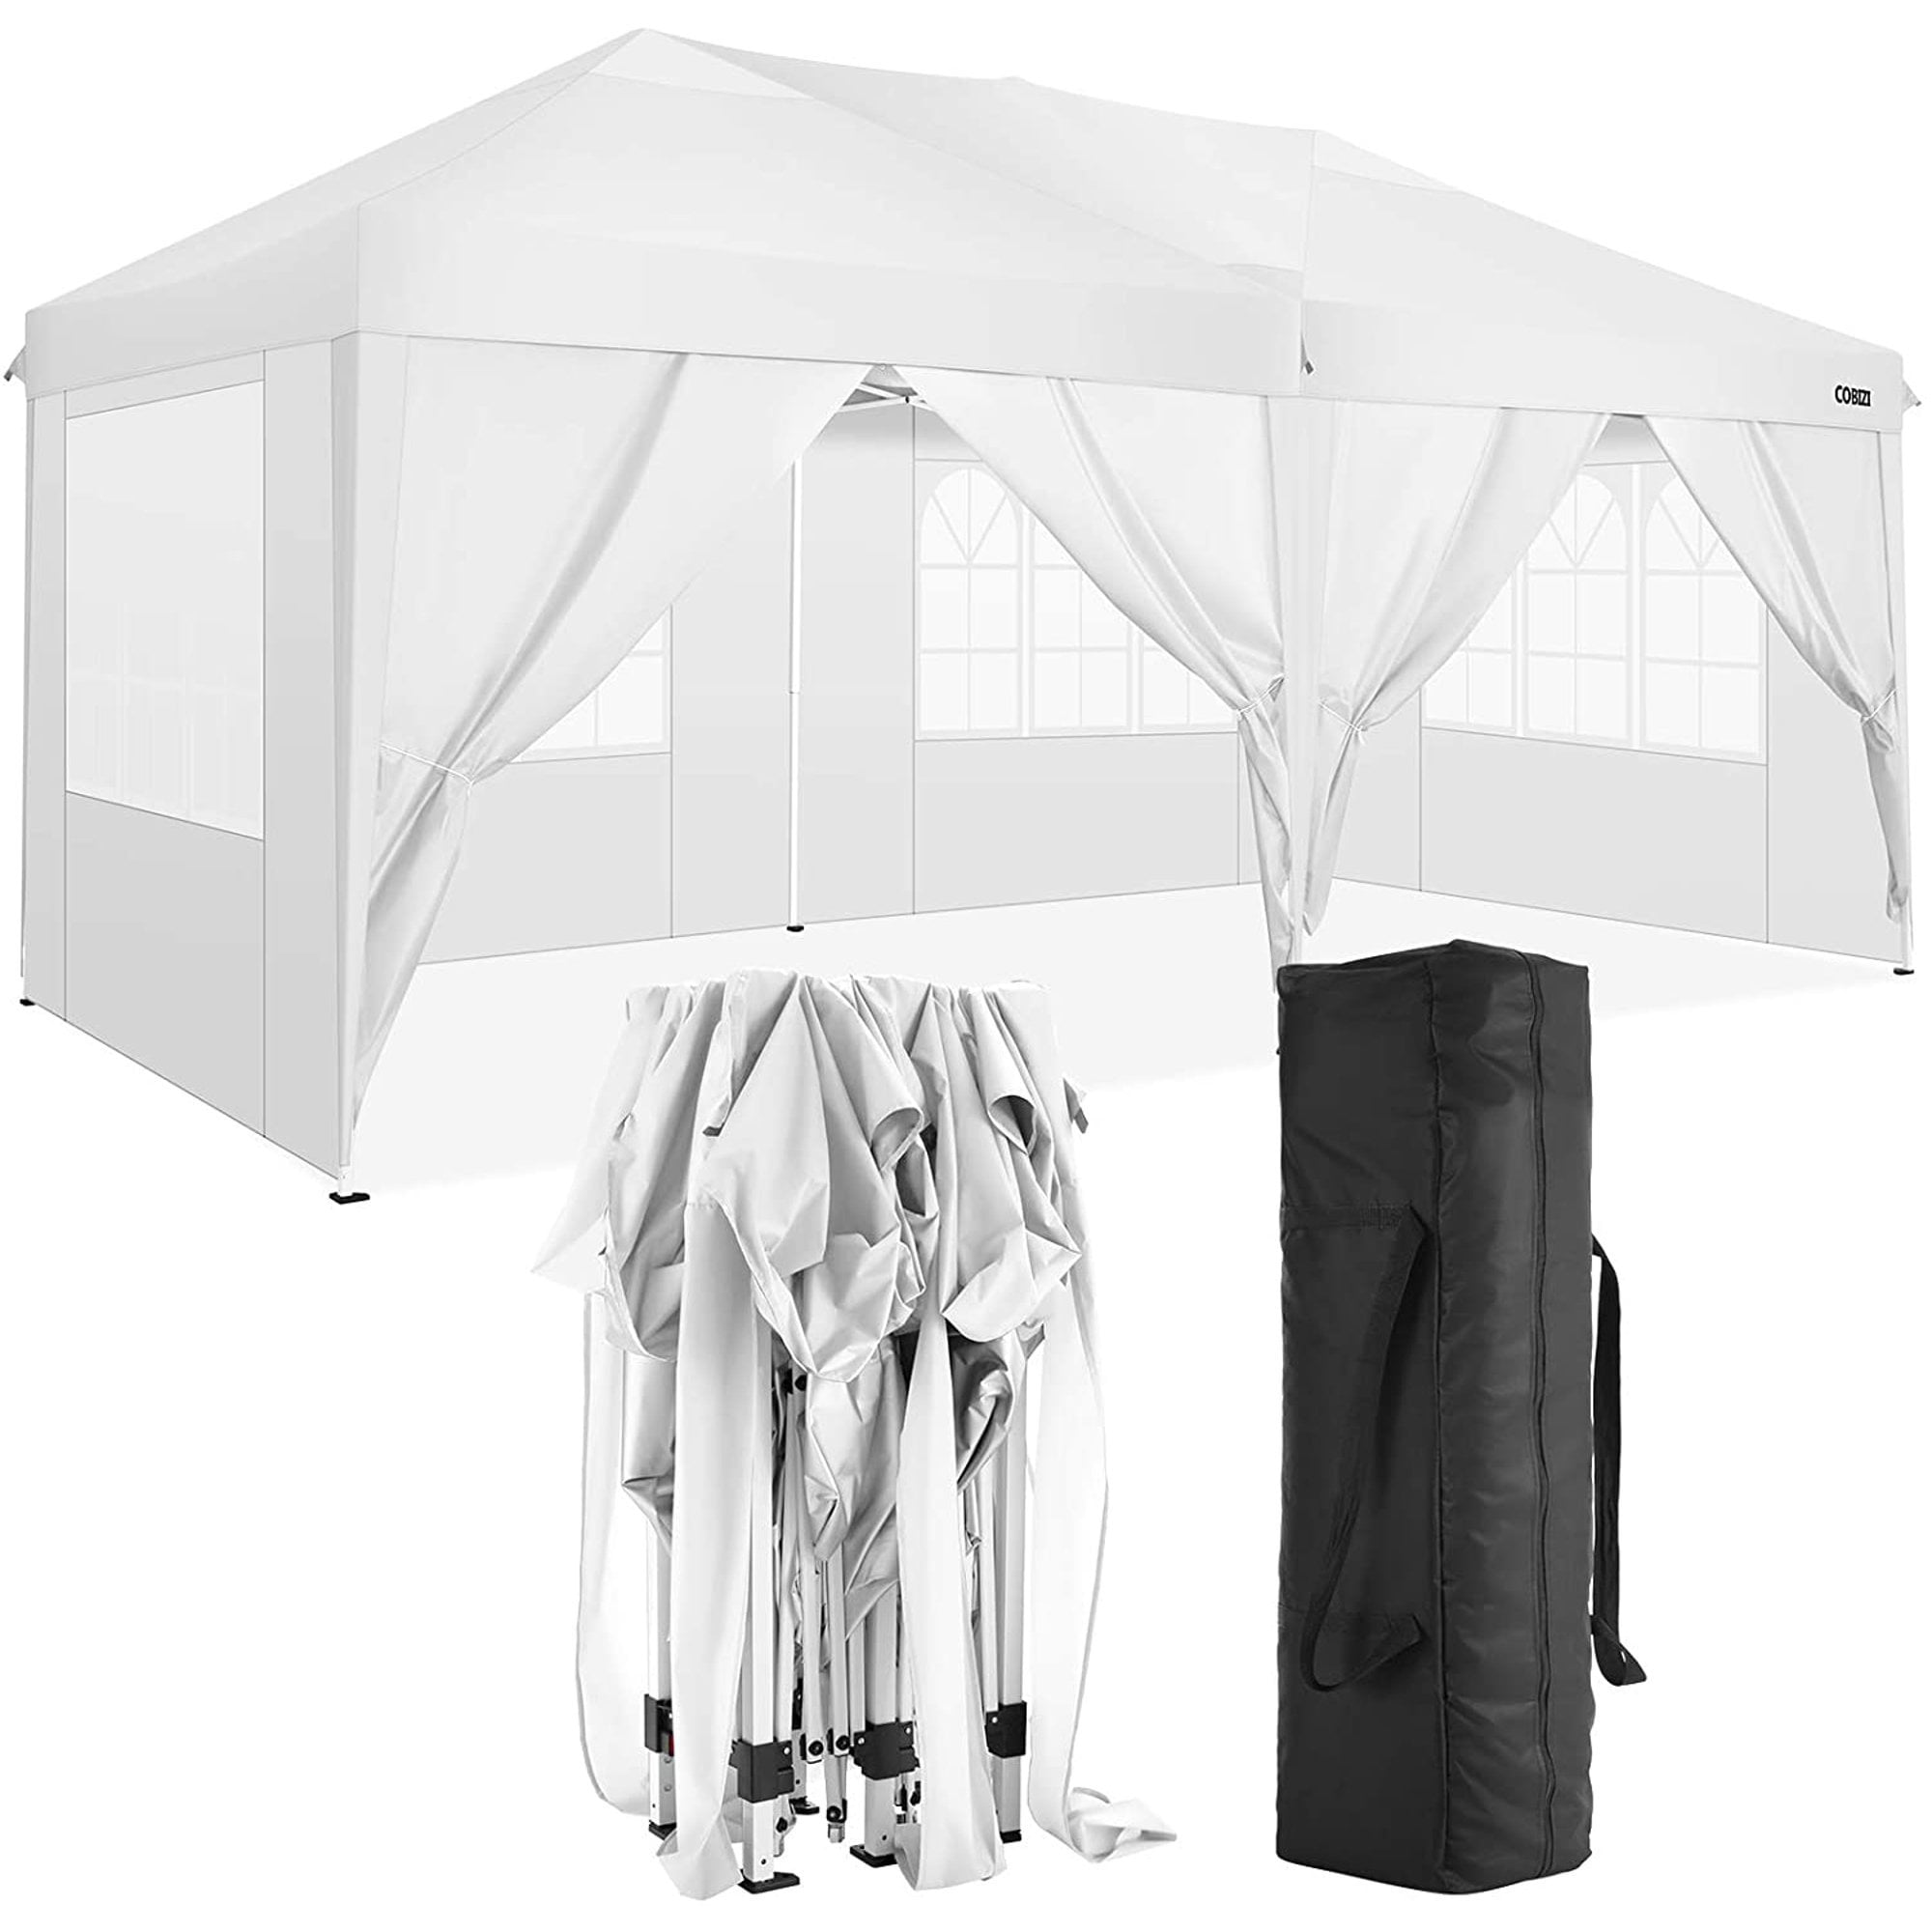 charaHOME 10x20 Outdoor Canopy Tent,10 X 20 Ez Up Pop Up Tent,Adjustable Folding Gazebo Pavilion Patio Shelter With 4 Sidewalls,Easy Pop Up Canopy Heavy Duty Tent,10 x 20 Canopy Beach Tent,White Color 